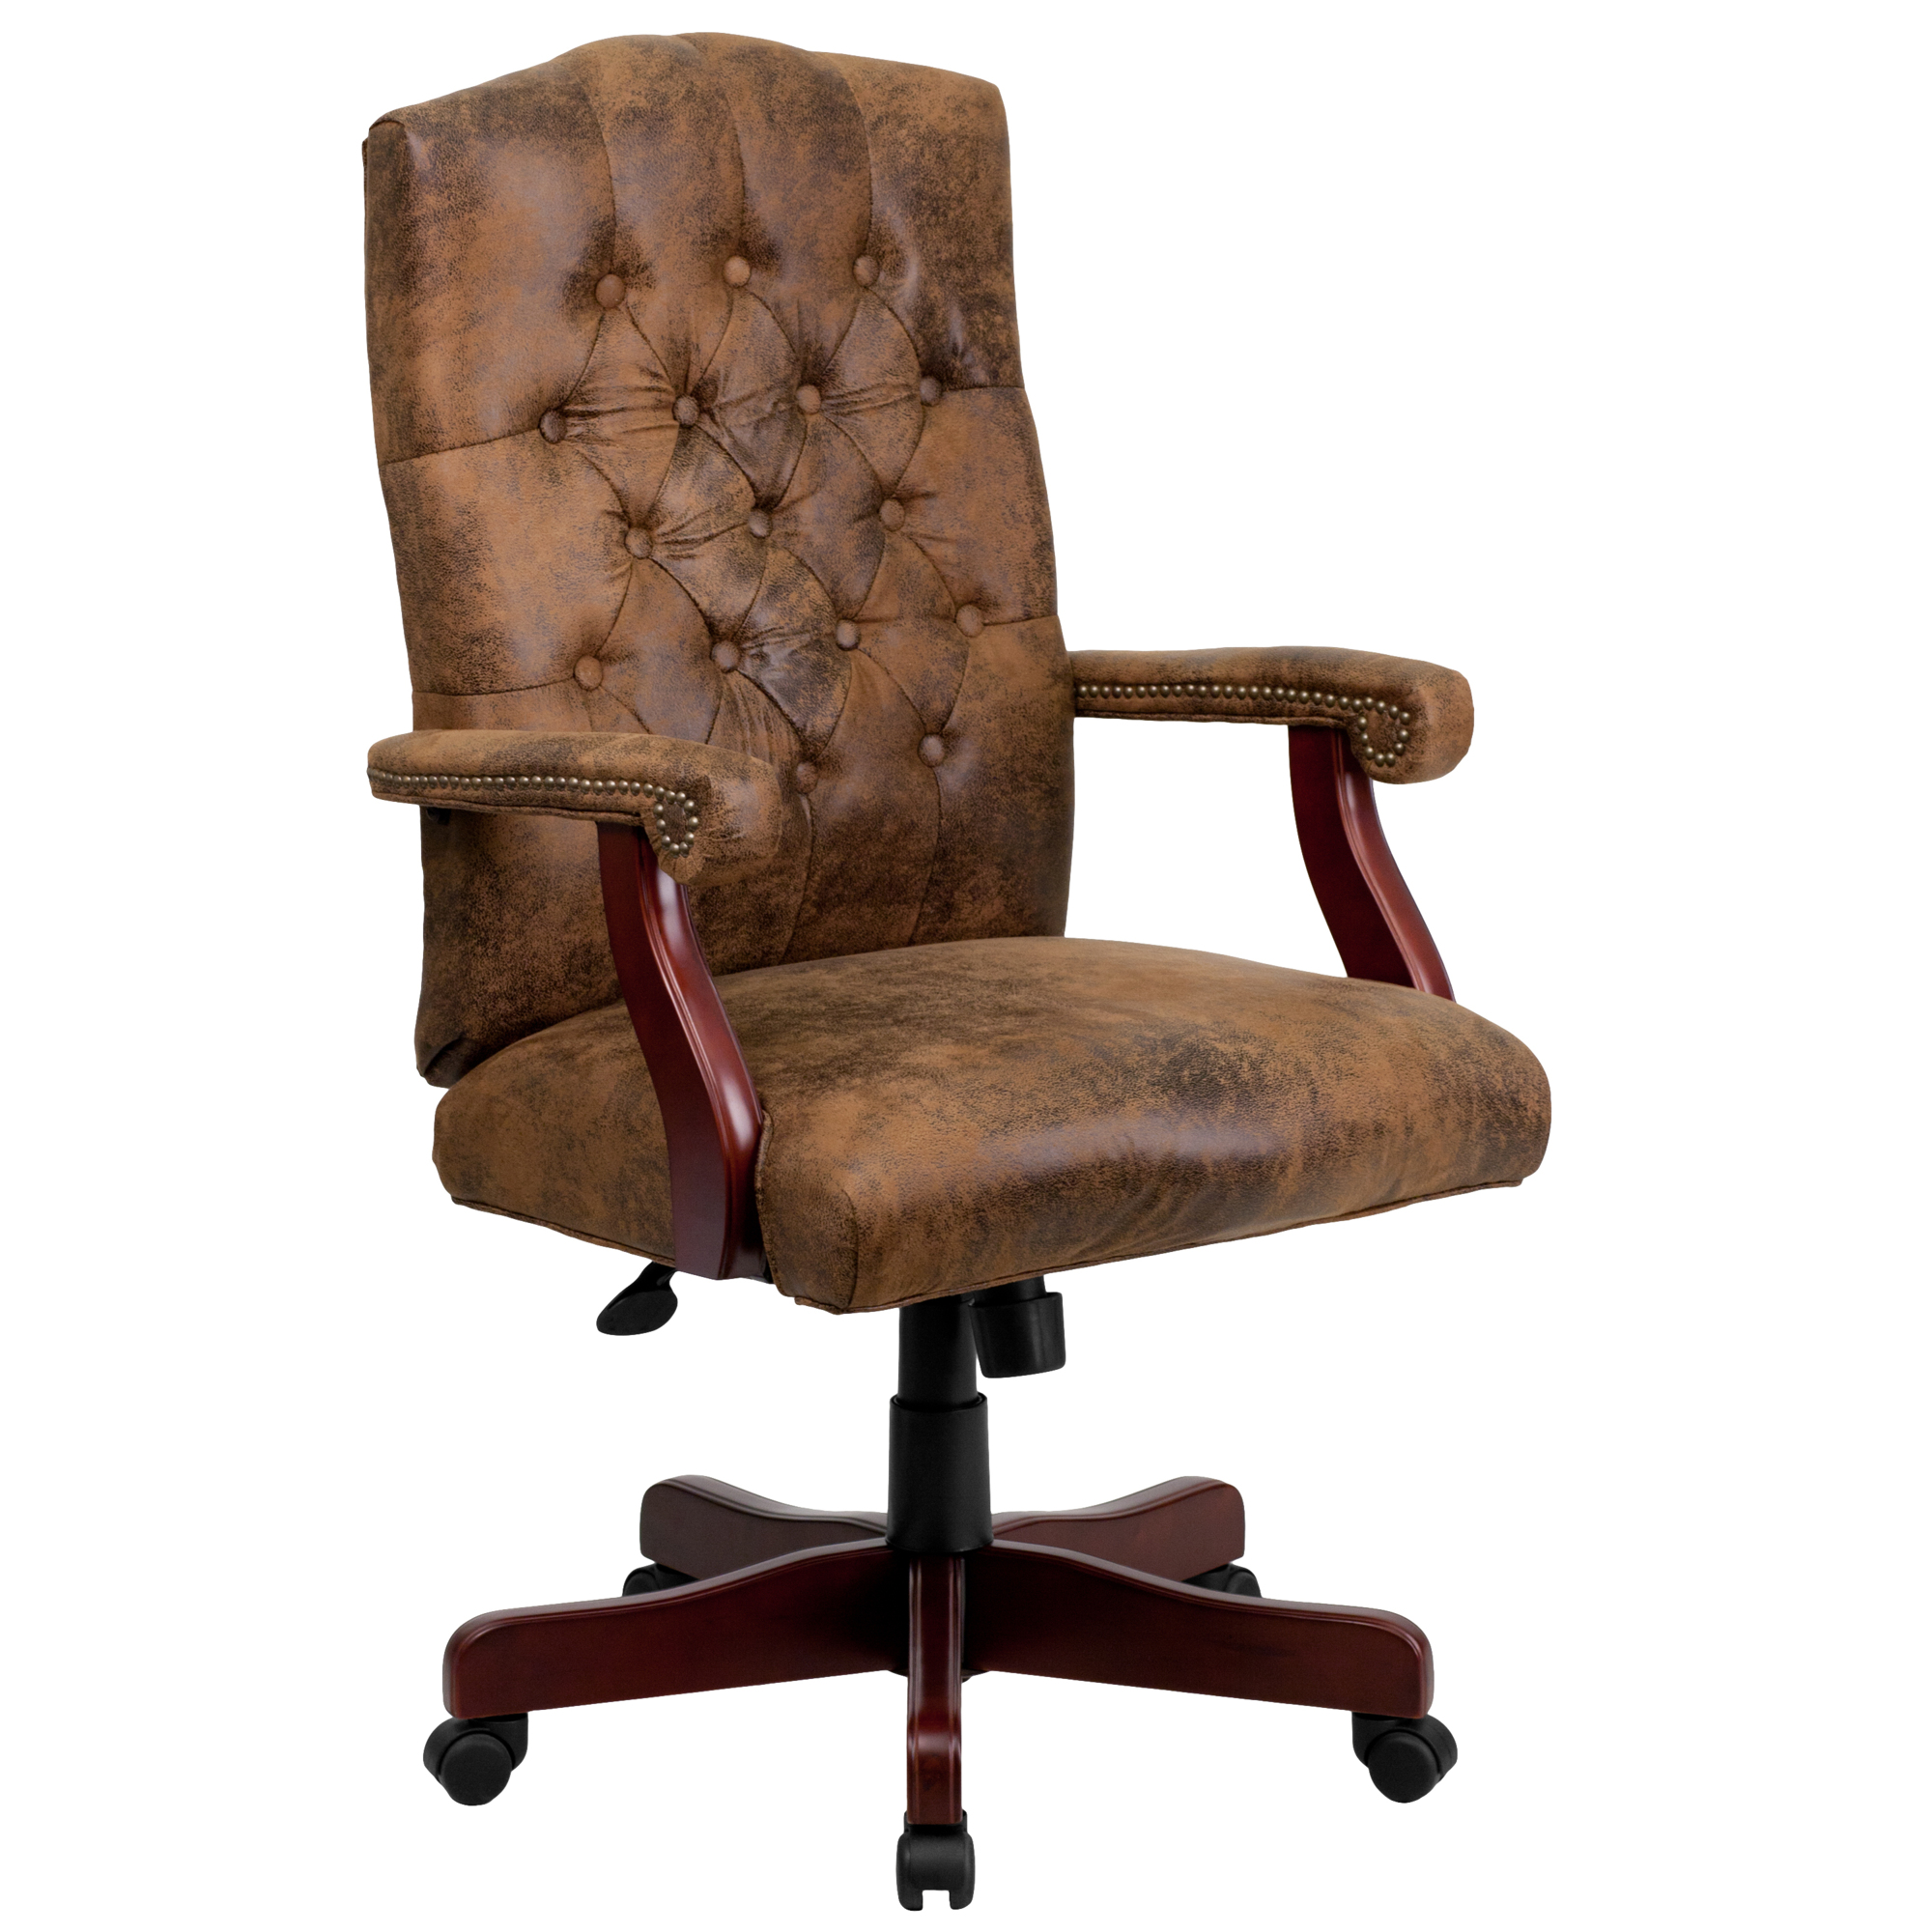 Flash Furniture, Bomber Brown Classic Executive Office Chair, Primary Color Brown, Included (qty.) 1, Model 802BRN